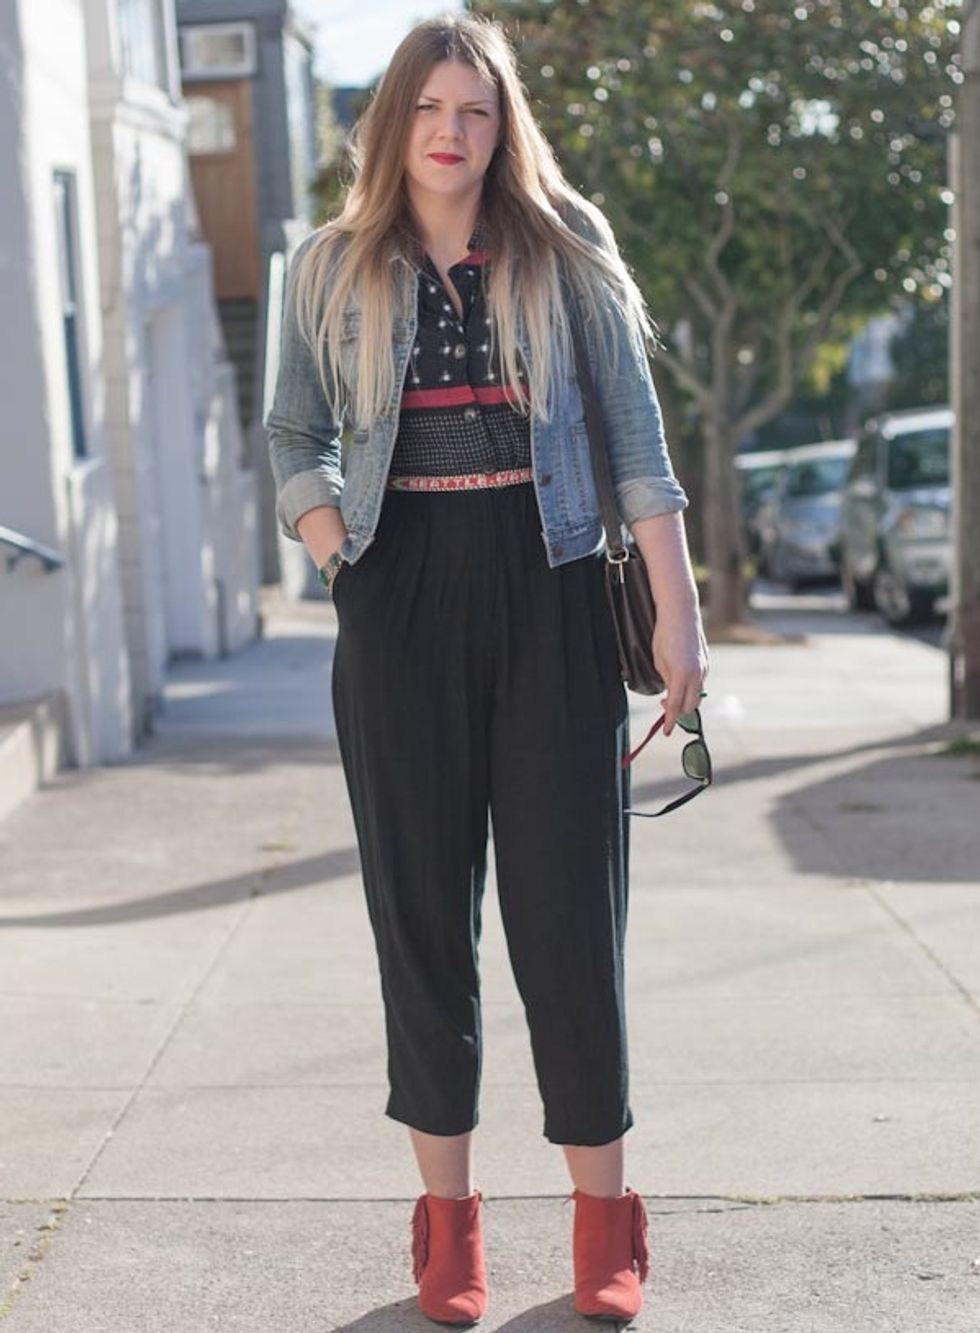 Street Style Report: A Stylist Shows Us Three Spring Looks, in Noe Valley